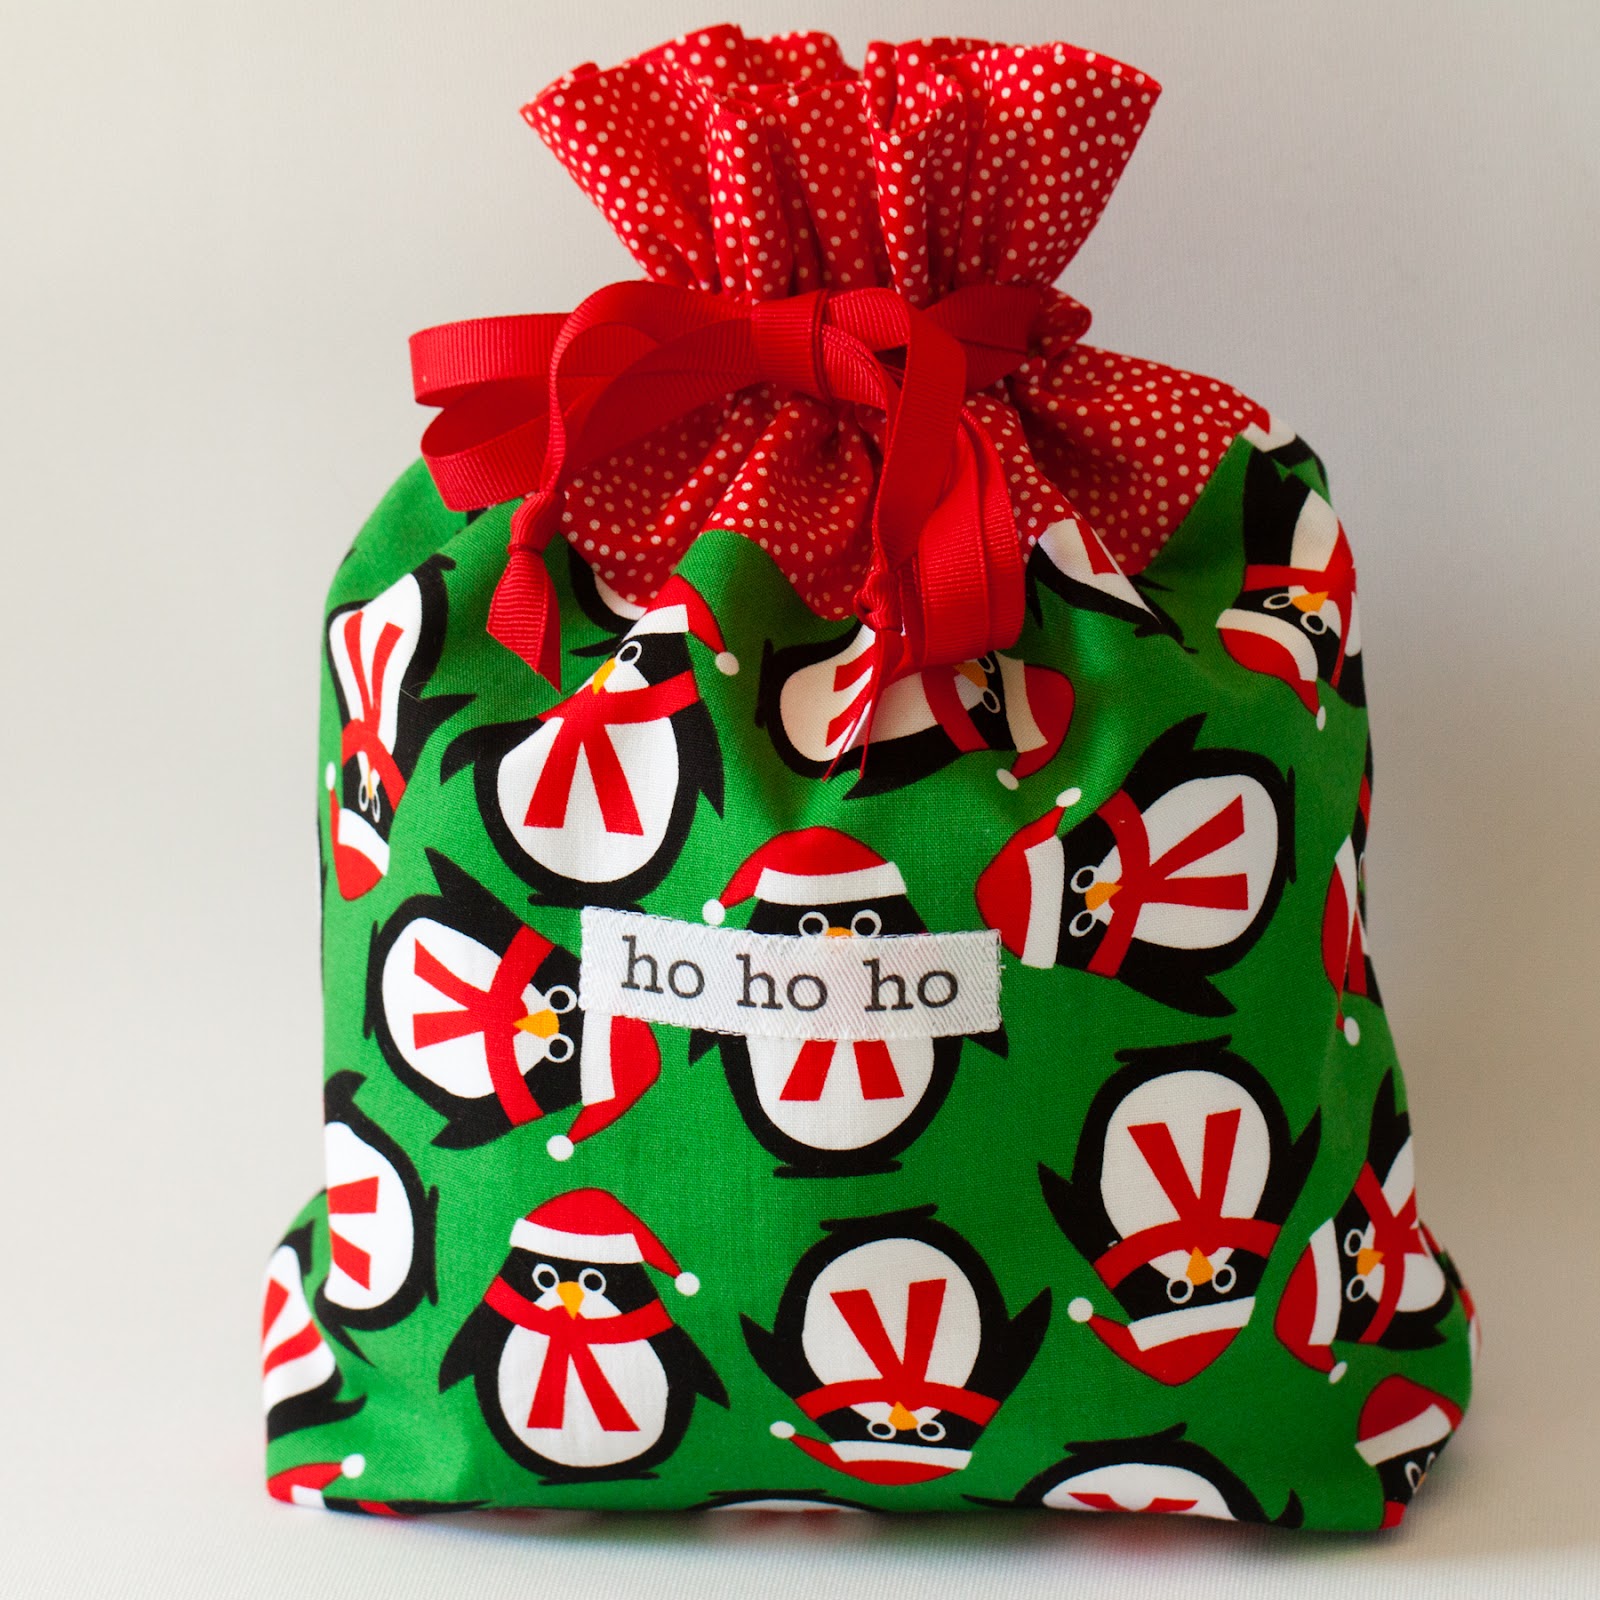 October 4 - Christmas Fabric Gift Bags